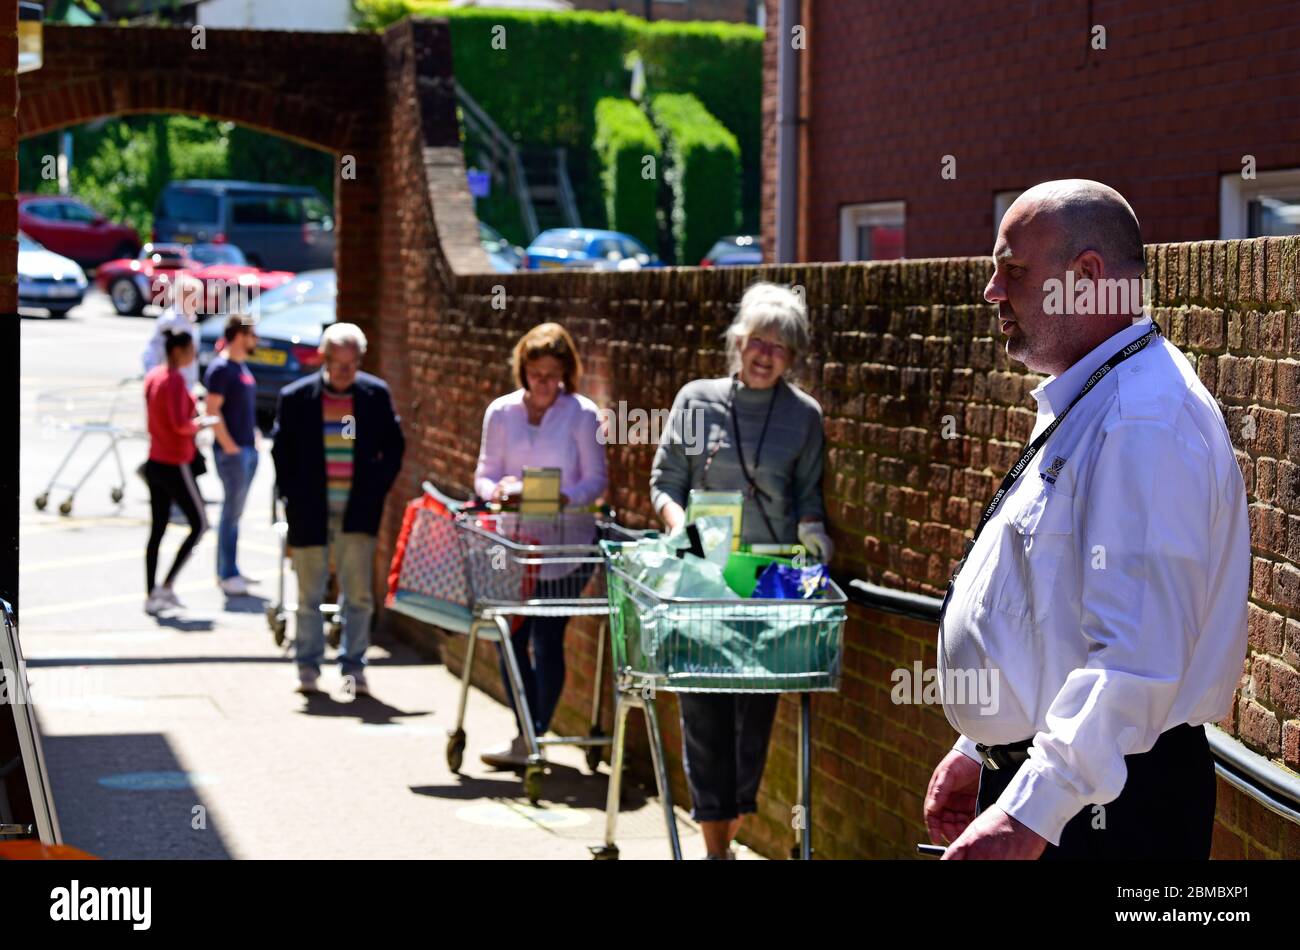 Security guard (foreground right) ensuring shoppers enter supermarket according to social distancing measures introduced due to the COVID-19, Surrey Stock Photo